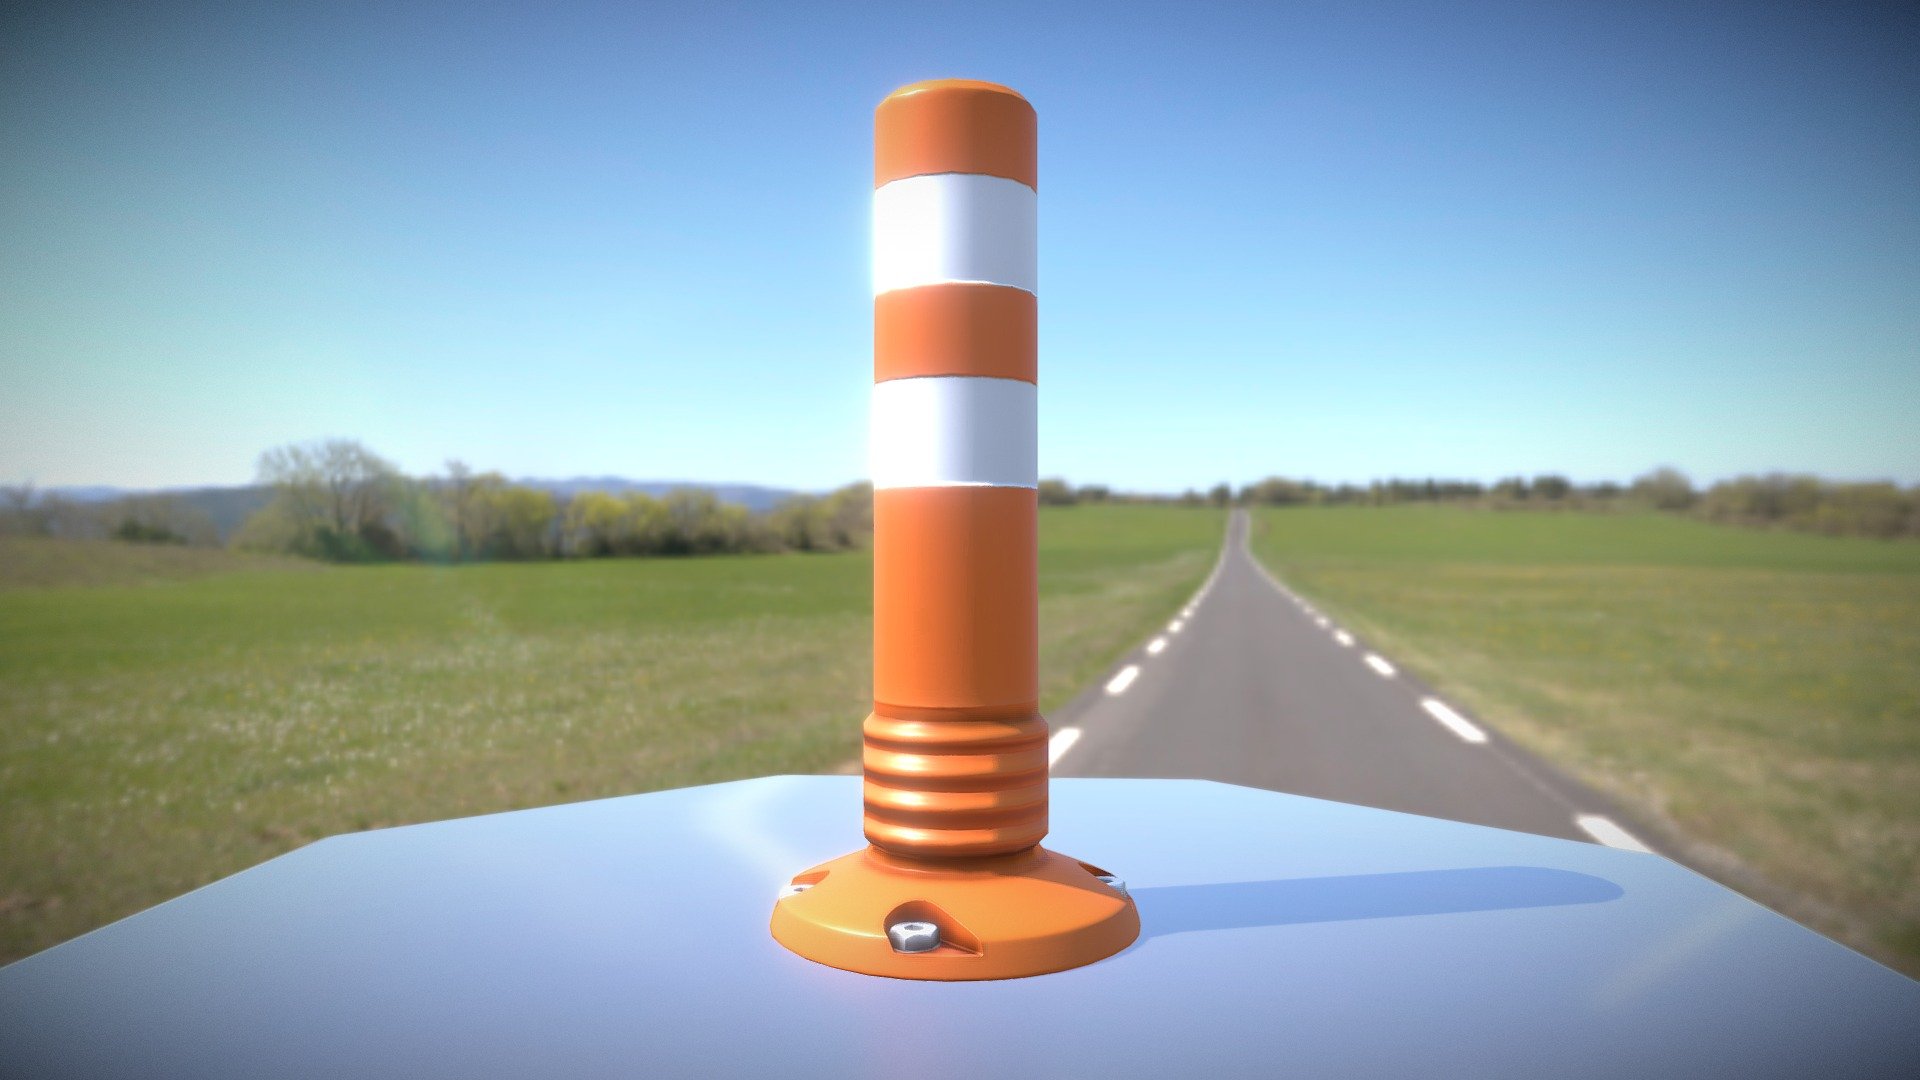 Here is the 450mm version of an low-poly traffic delineator from Germany.

Maybe interesting for city planning or video games.



Available Textures:

-Diffuse map
-Normal map



Available formats:

Collada (.dae)

DirectX (.X)

X3D (.x3d)

Autodesk FBX (.fbx)

Alias/WaveFront Material (.mtl)

OBJ (.obj)

Blender (.blend)

3D Studio (.3ds)

DXF (.dxf)

Agisoft Photoscan (.ply)

Stereolithography (.stl)

VRML (.wrl, .wrz)


 - Traffic Delineator Flexipoller (450mm) low-poly - Buy Royalty Free 3D model by VIS-All-3D (@VIS-All) 3d model